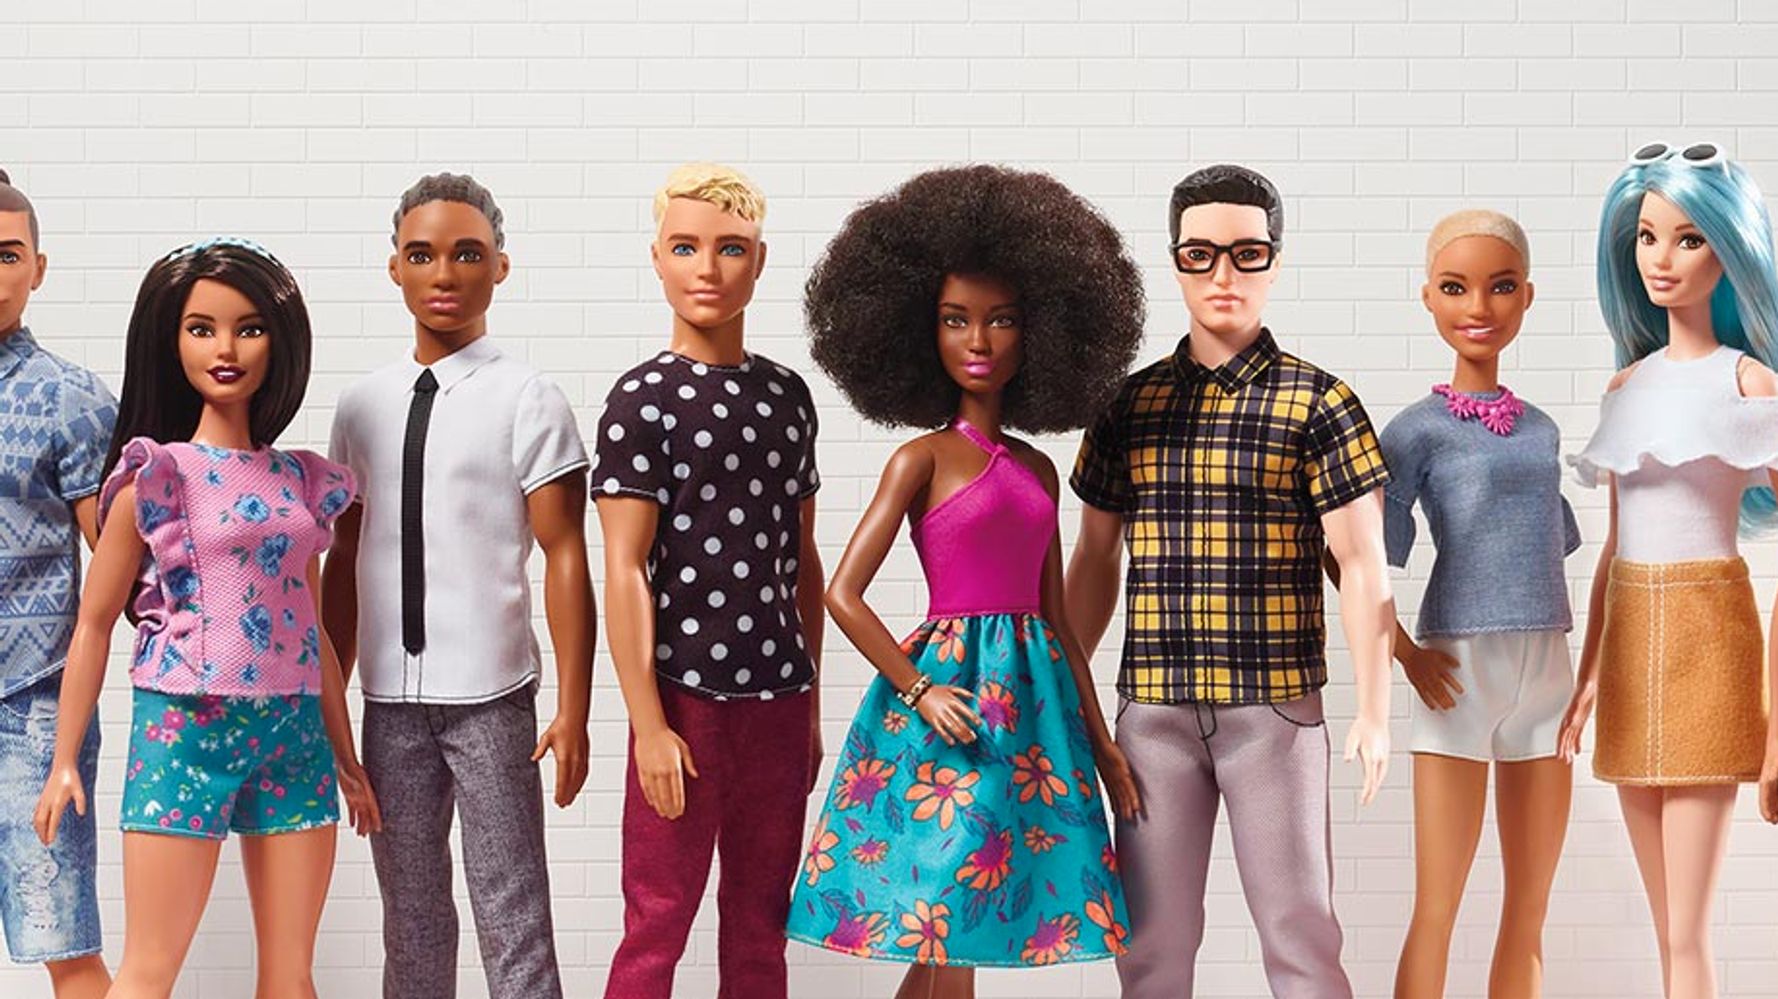 40 New Barbie And Ken Dolls Launched By Mattel With Different Body Free Download Nude Photo